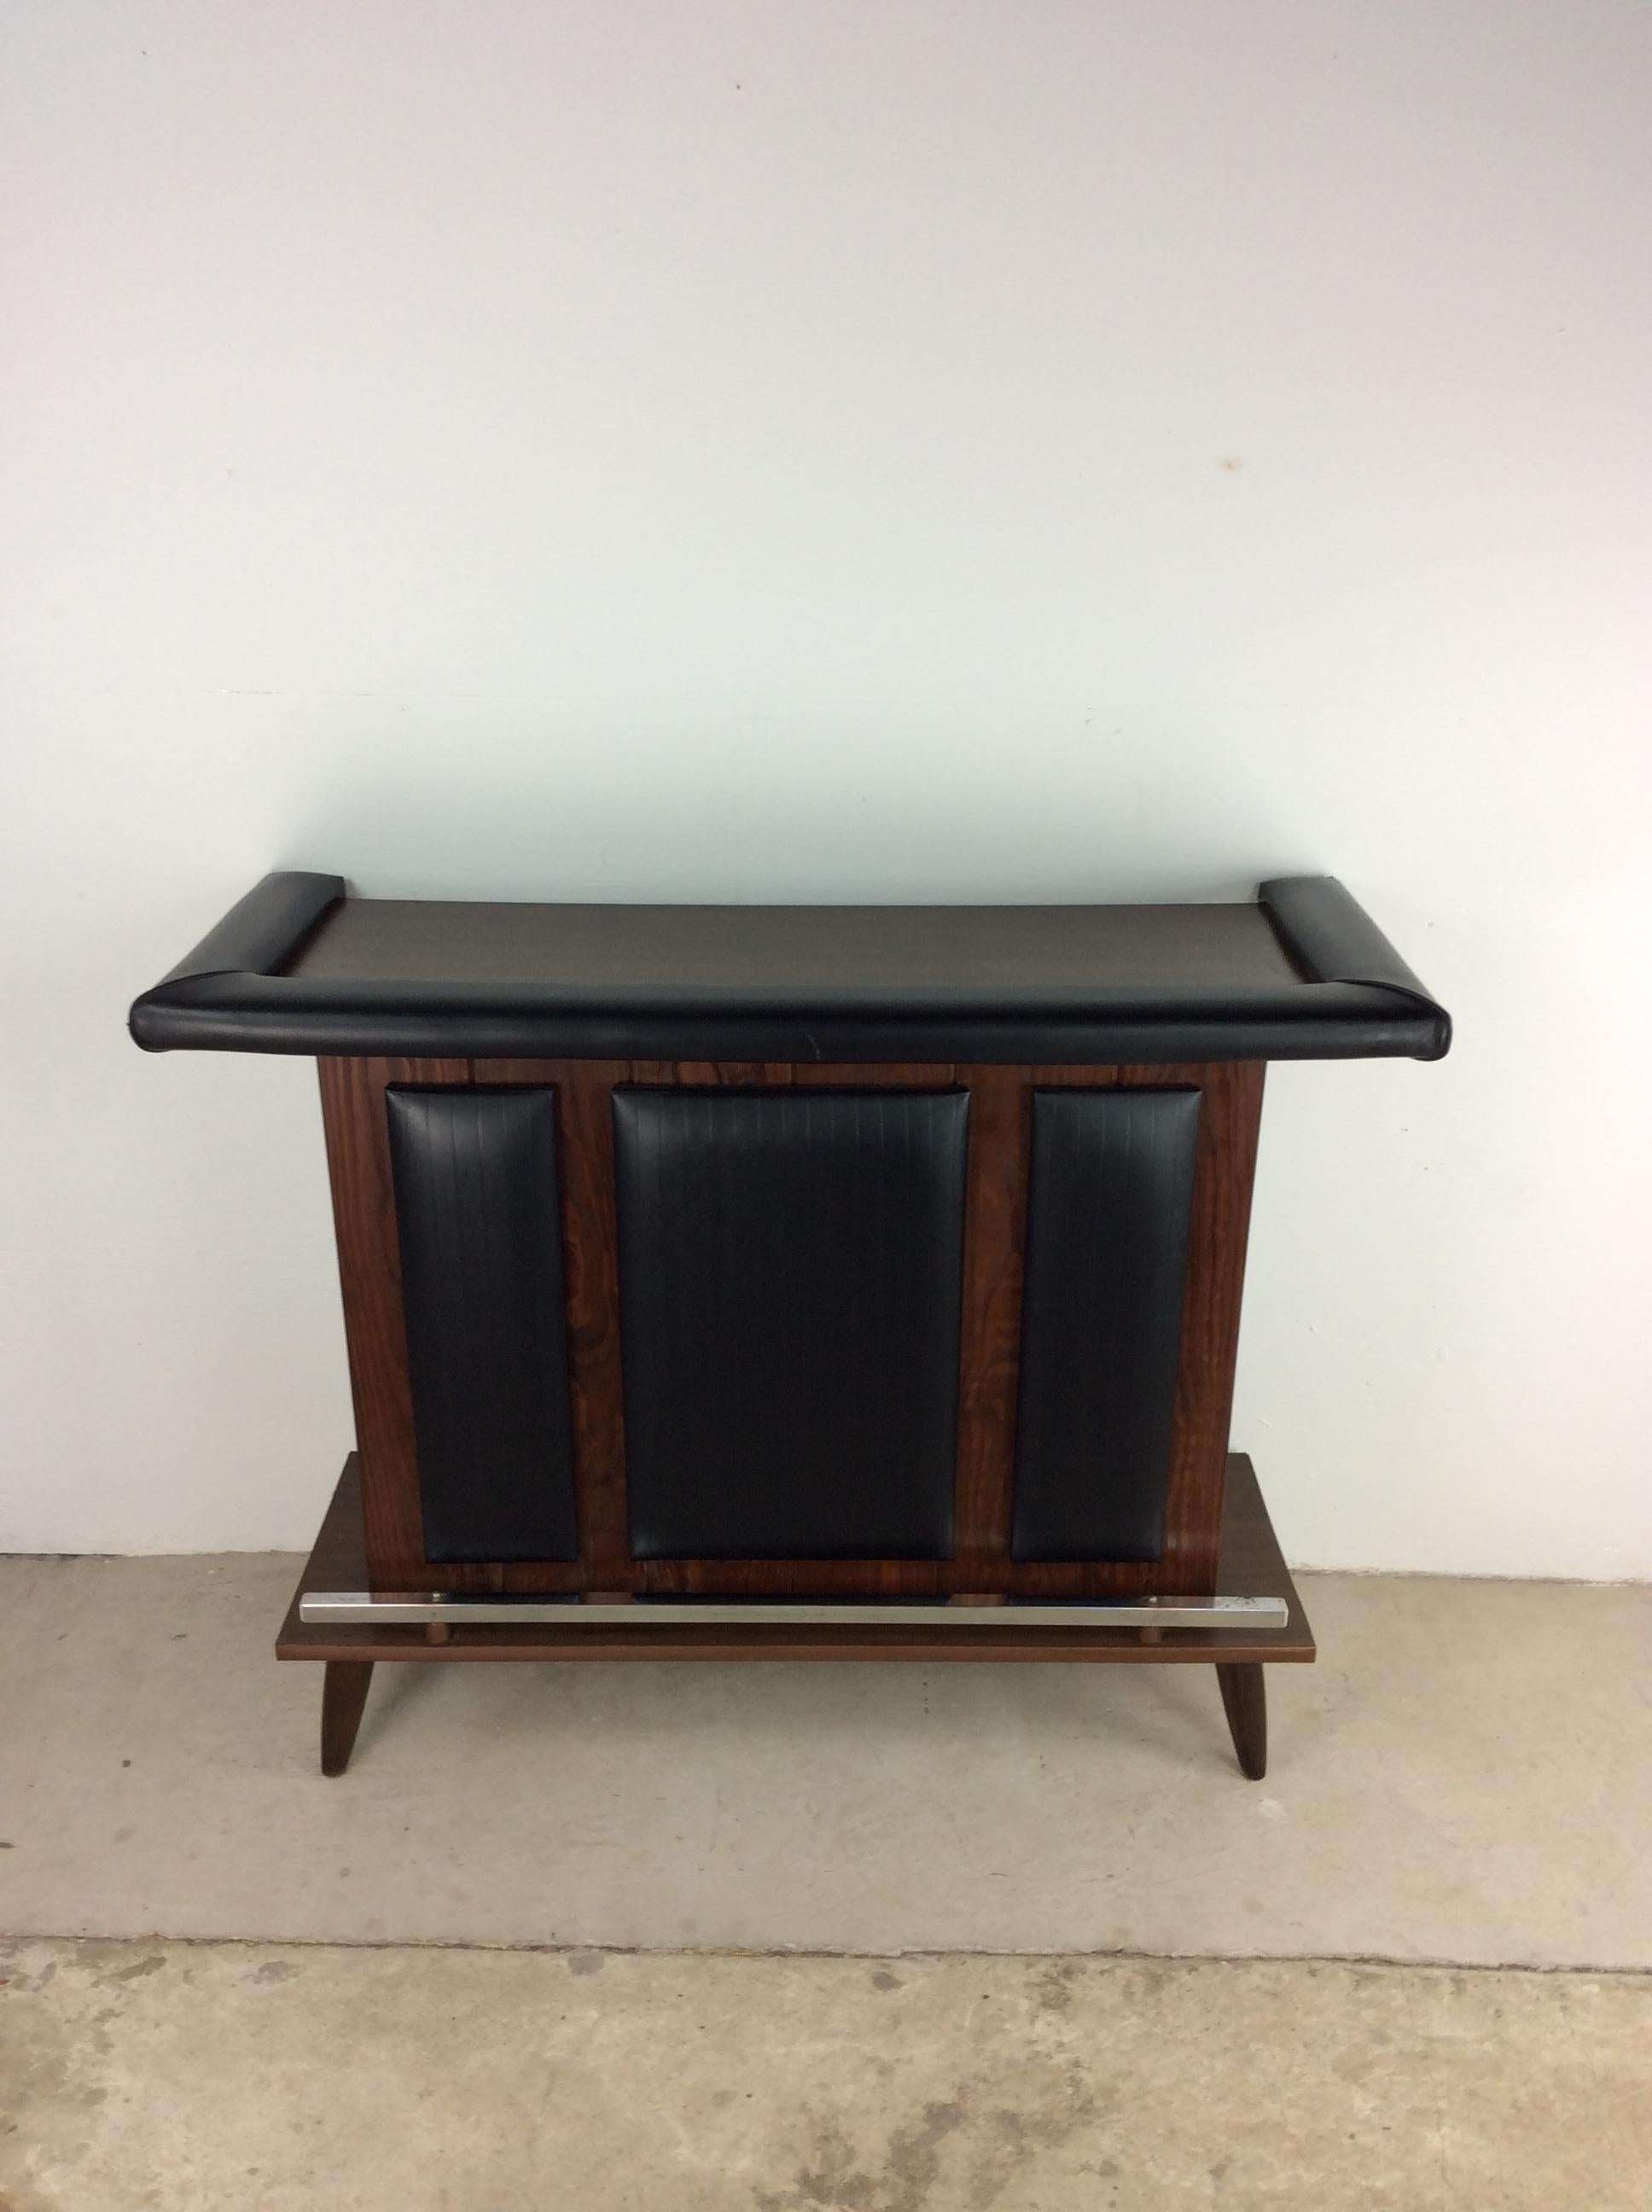 American Mid-Century Modern Dry Bar with Black Vinyl Accents